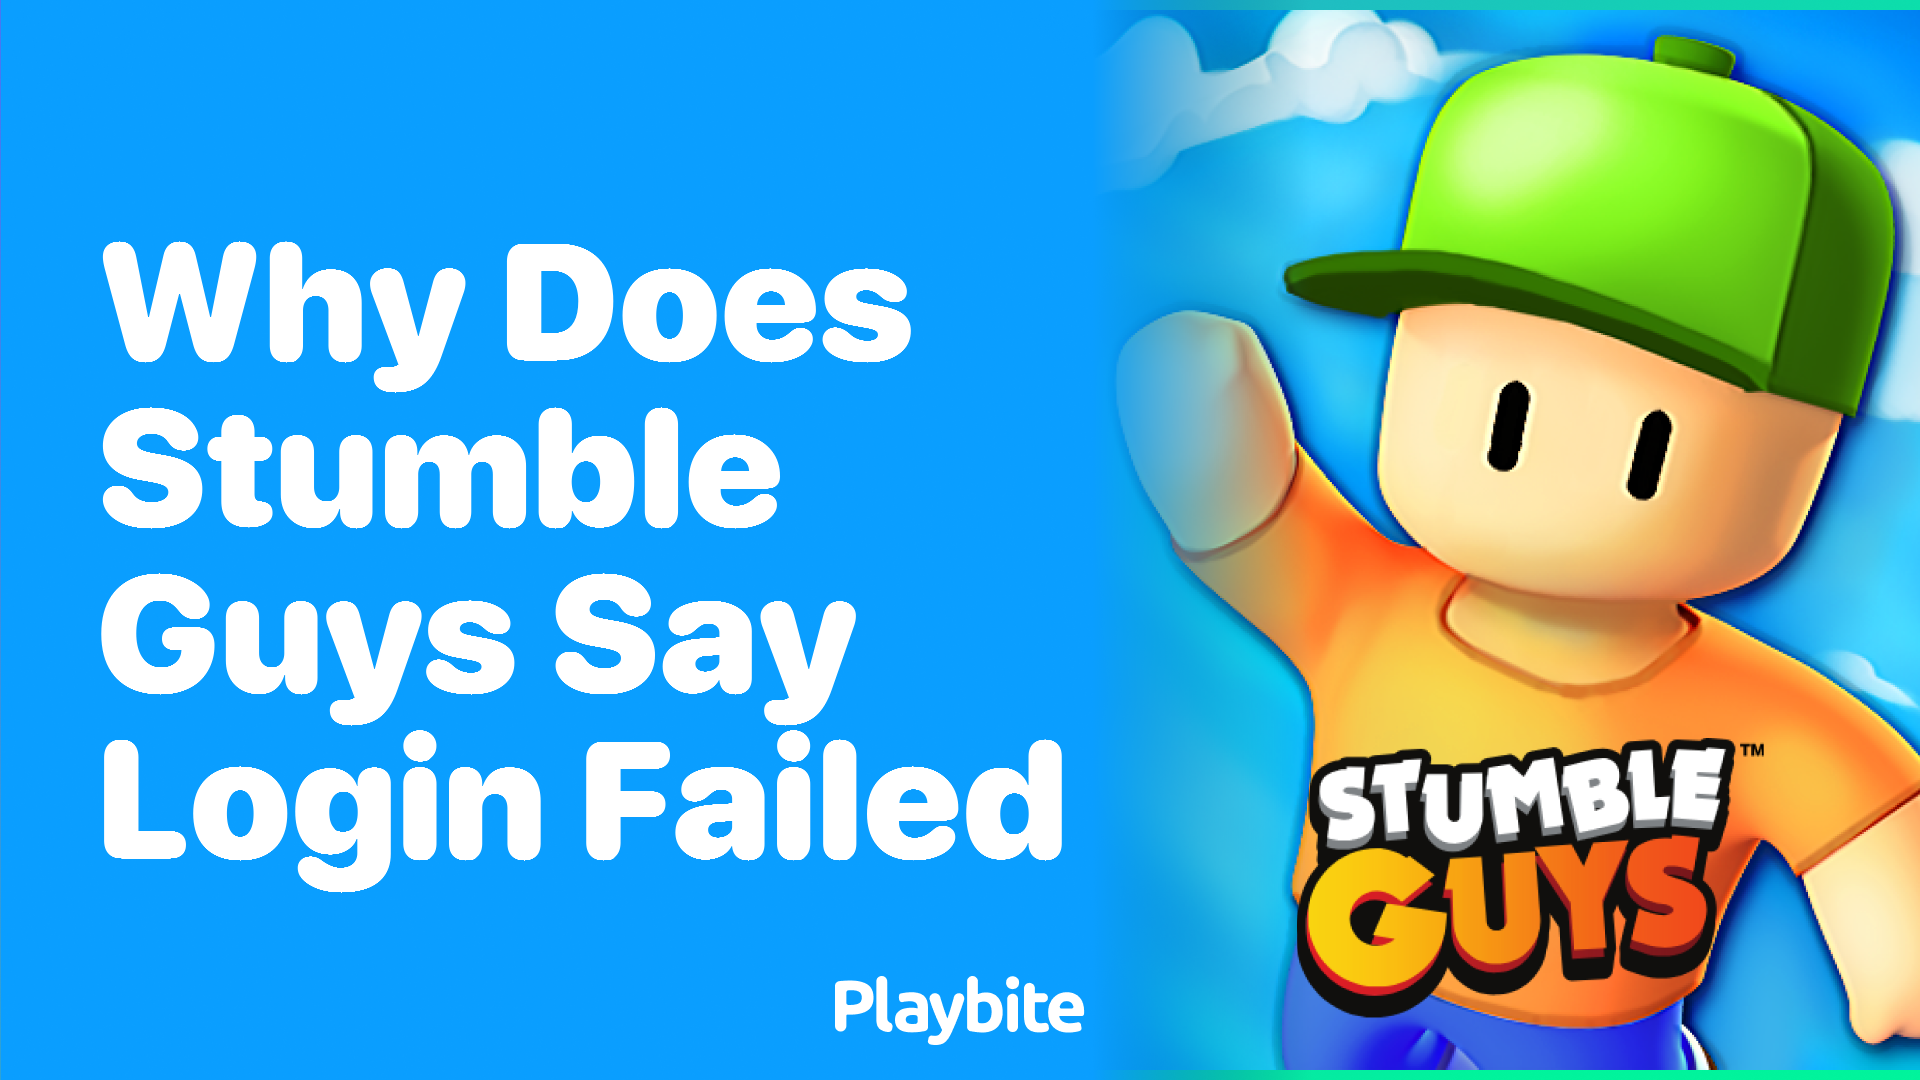 Why Does Stumble Guys Say Login Failed? Let&#8217;s Explore